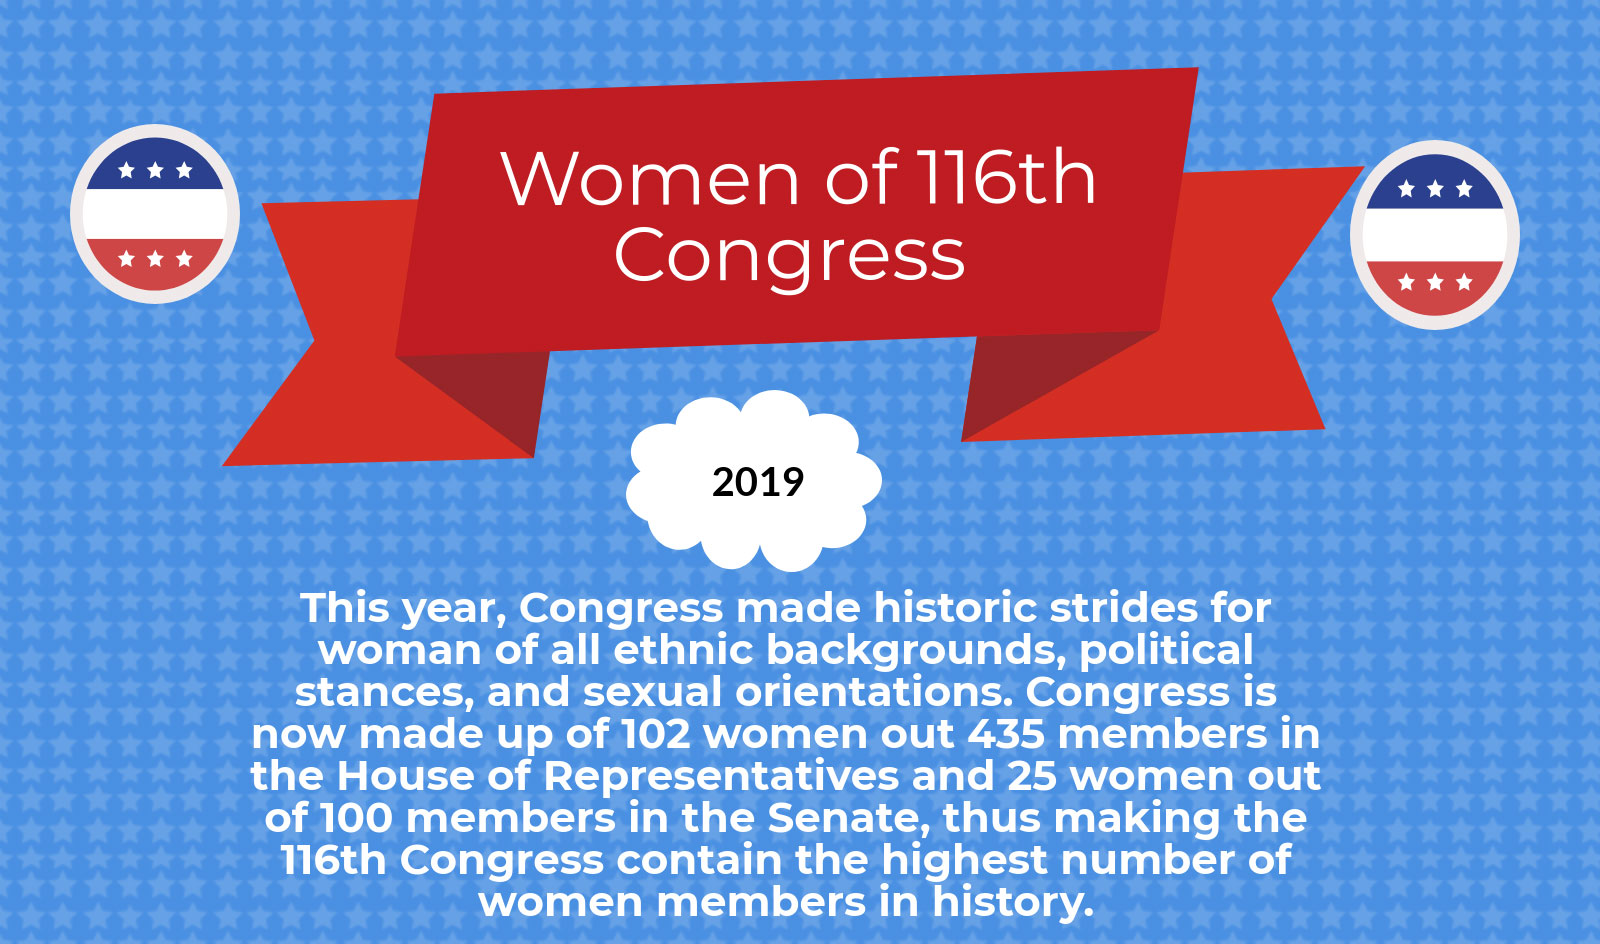 GRAPHIC: Visual of the statistics of diversification between the women members of the 116th Congress.